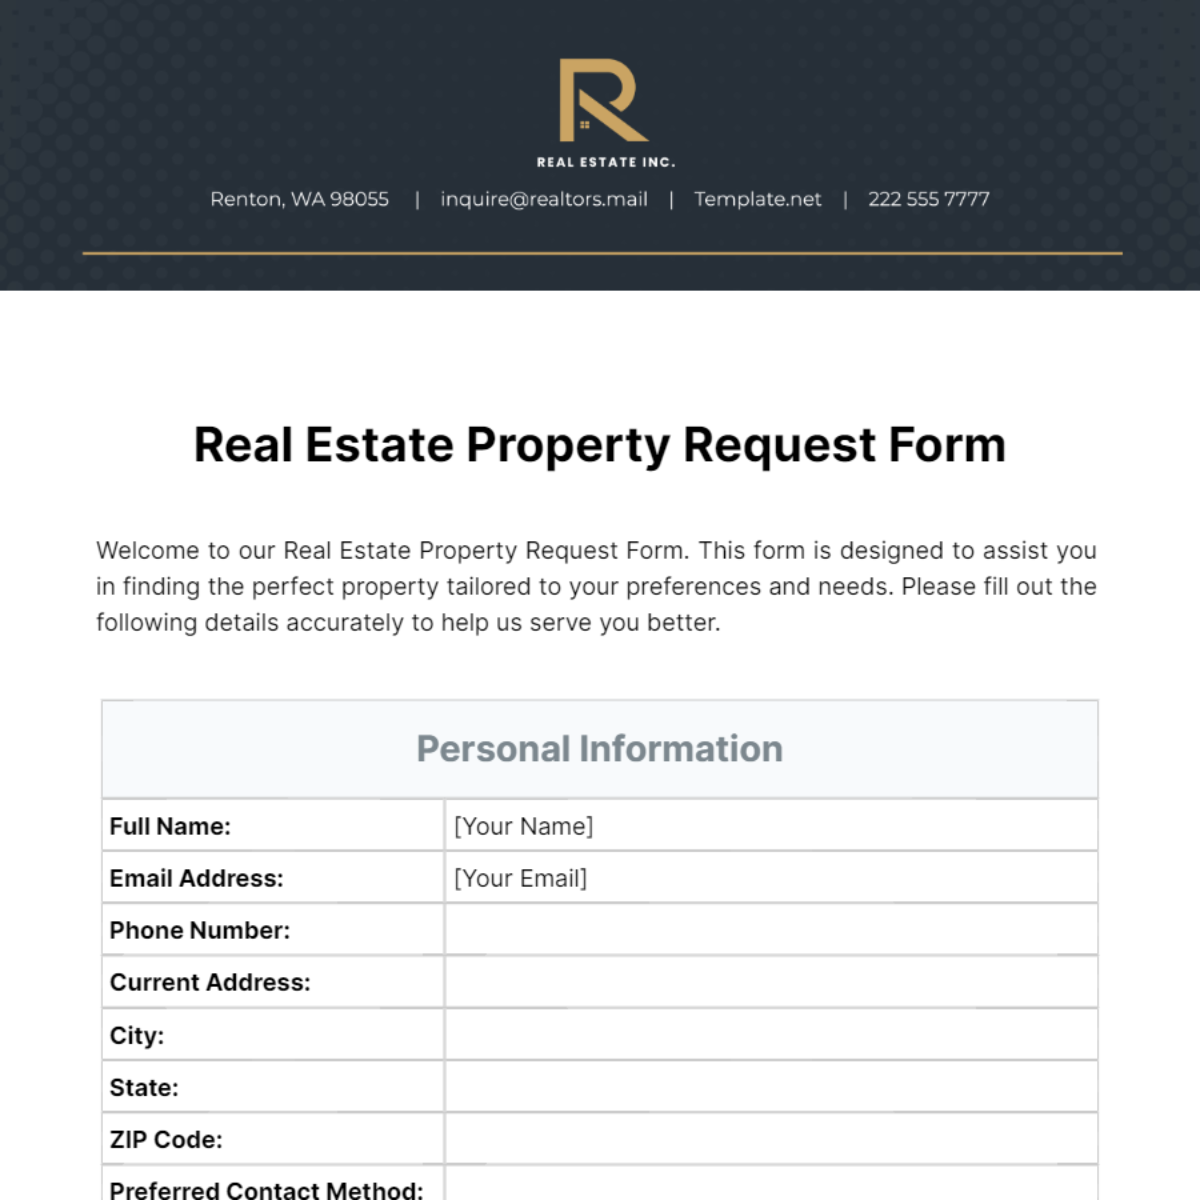 Real Estate Property Request Form Template